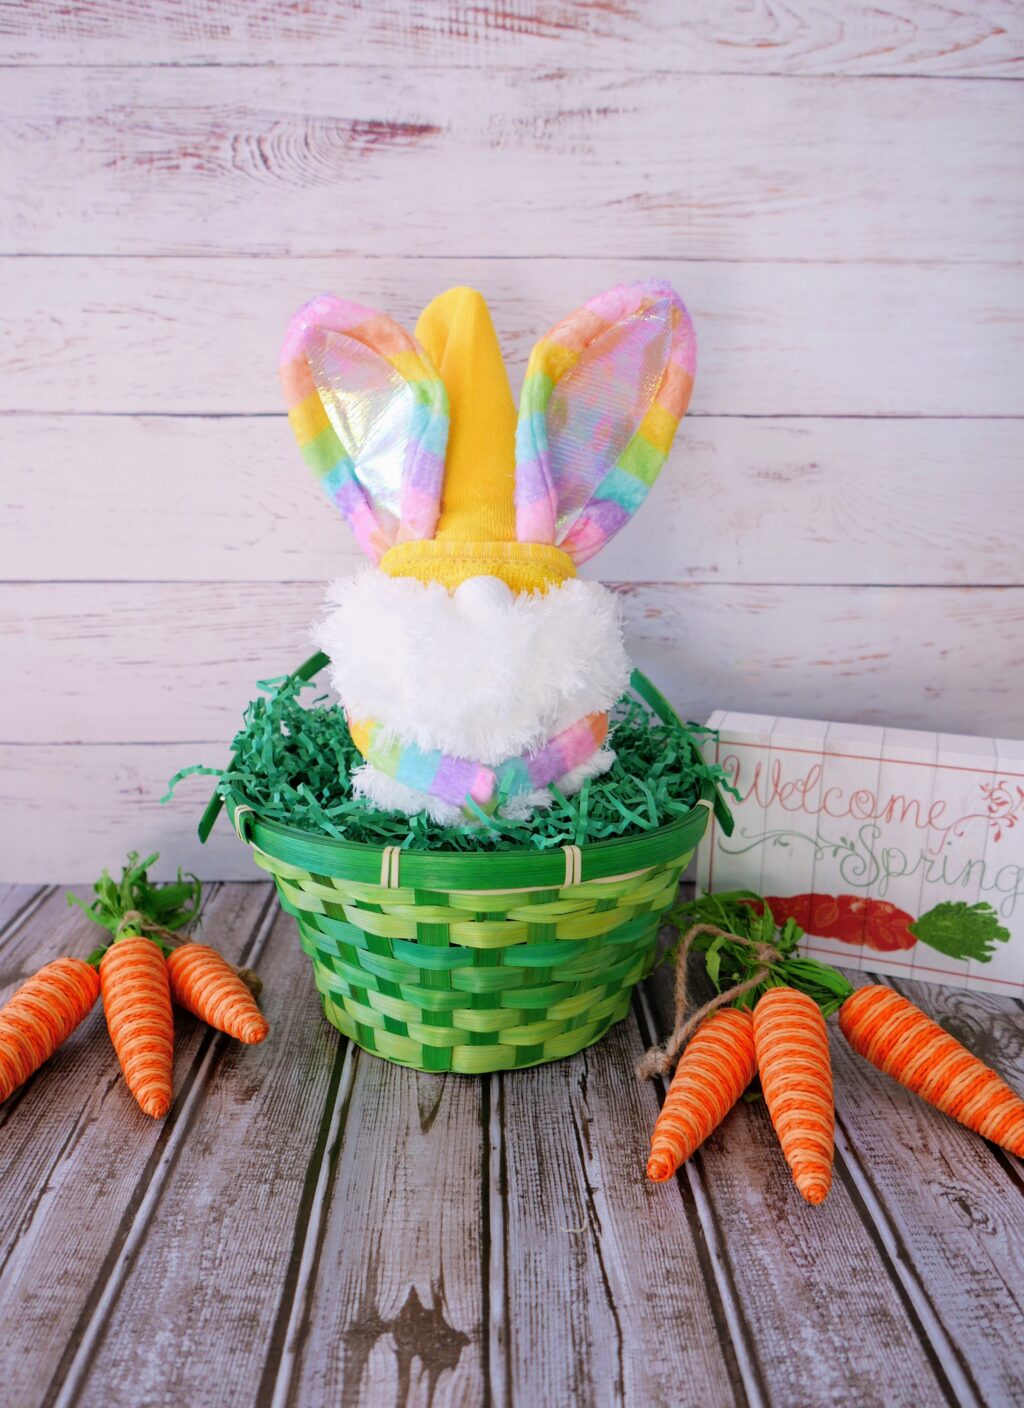 Rainbow bunny gnome made from dollar tree supplies. Finished Easter gnome in an Easter basket.